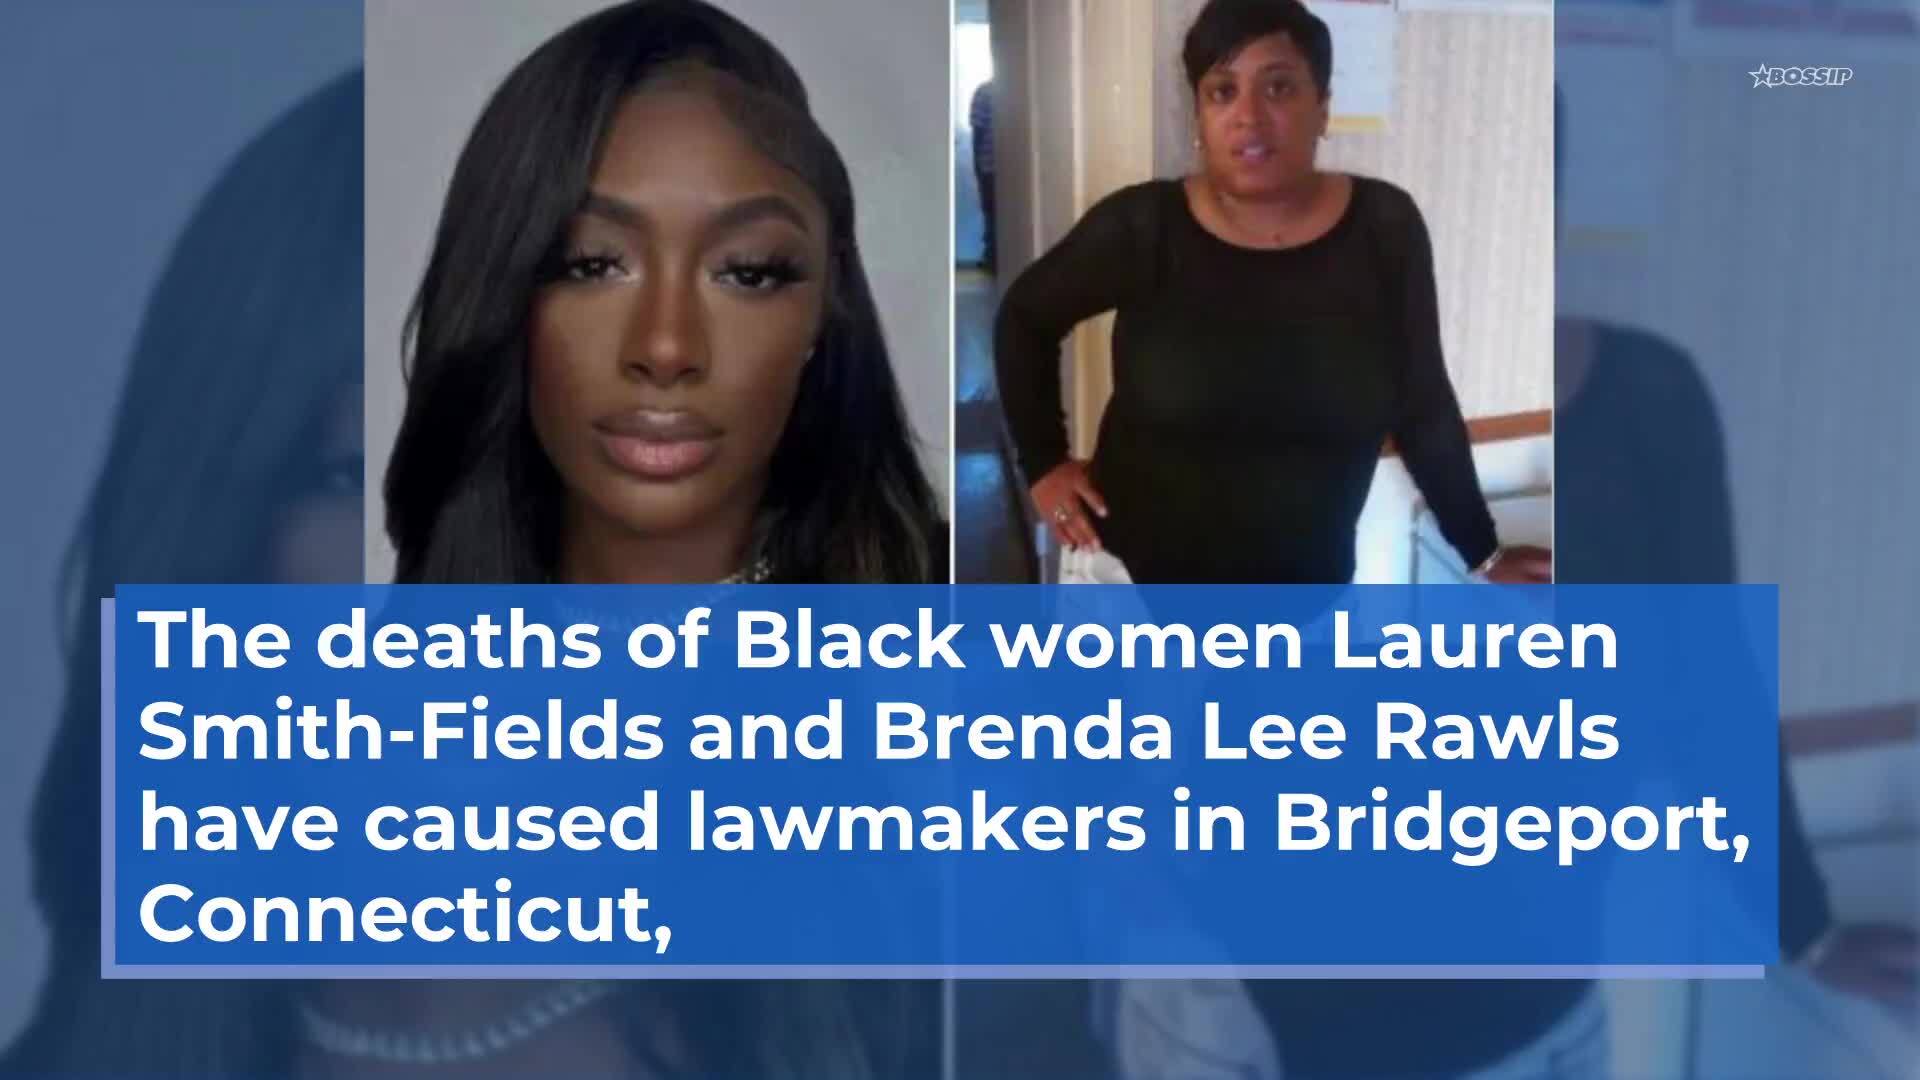 New Bill Pushed In Response To Lauren Smith-Fields, Brenda Lee Rawls Cases